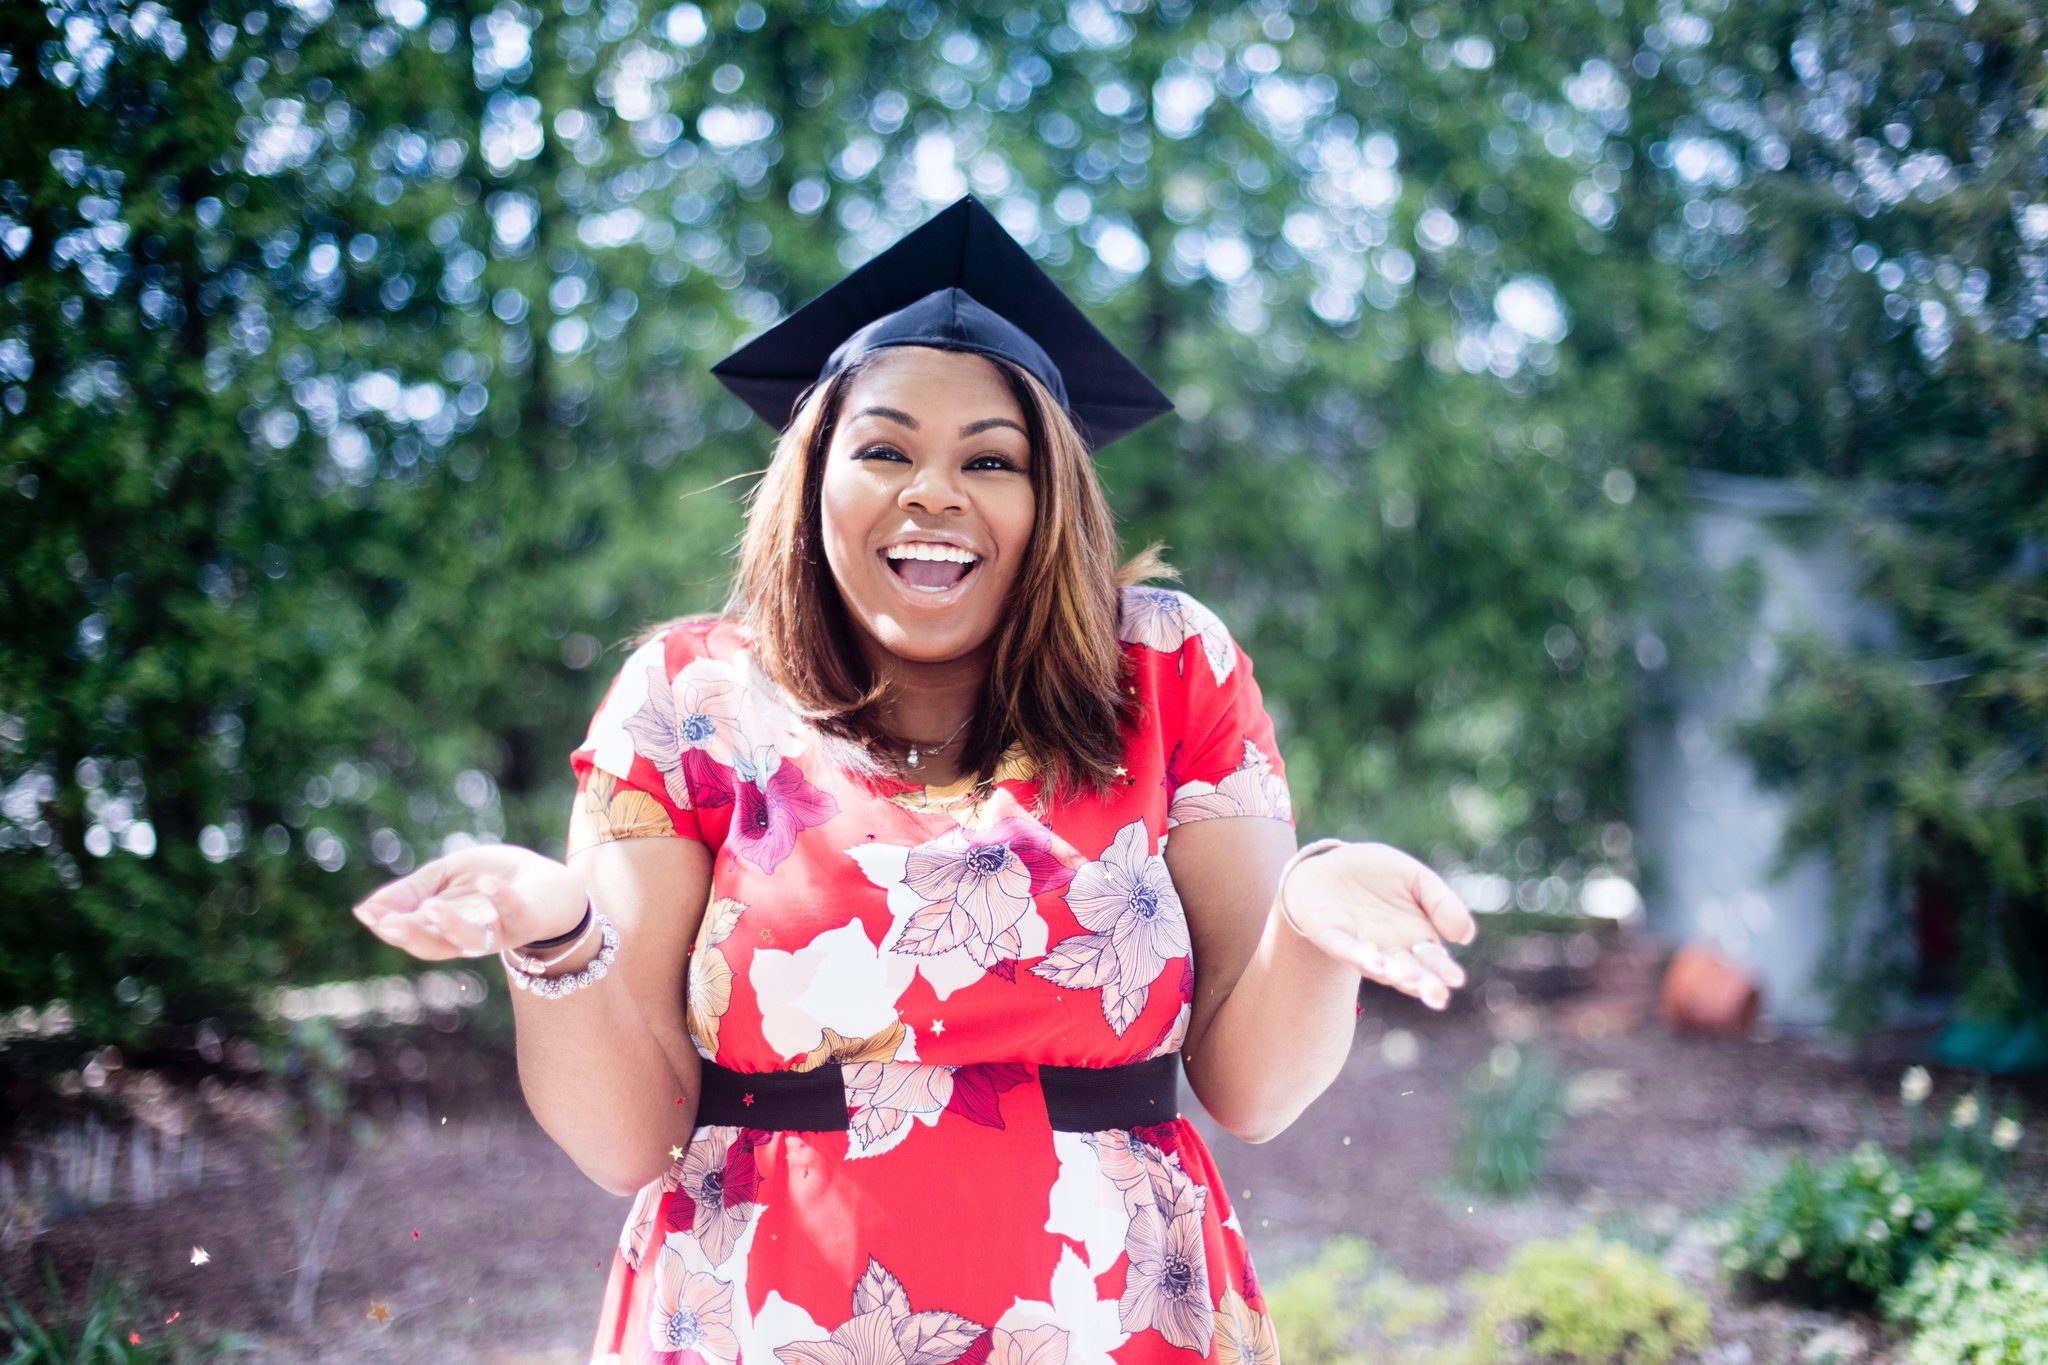 3 Tips on Hosting an Awesome DIY Graduation Party